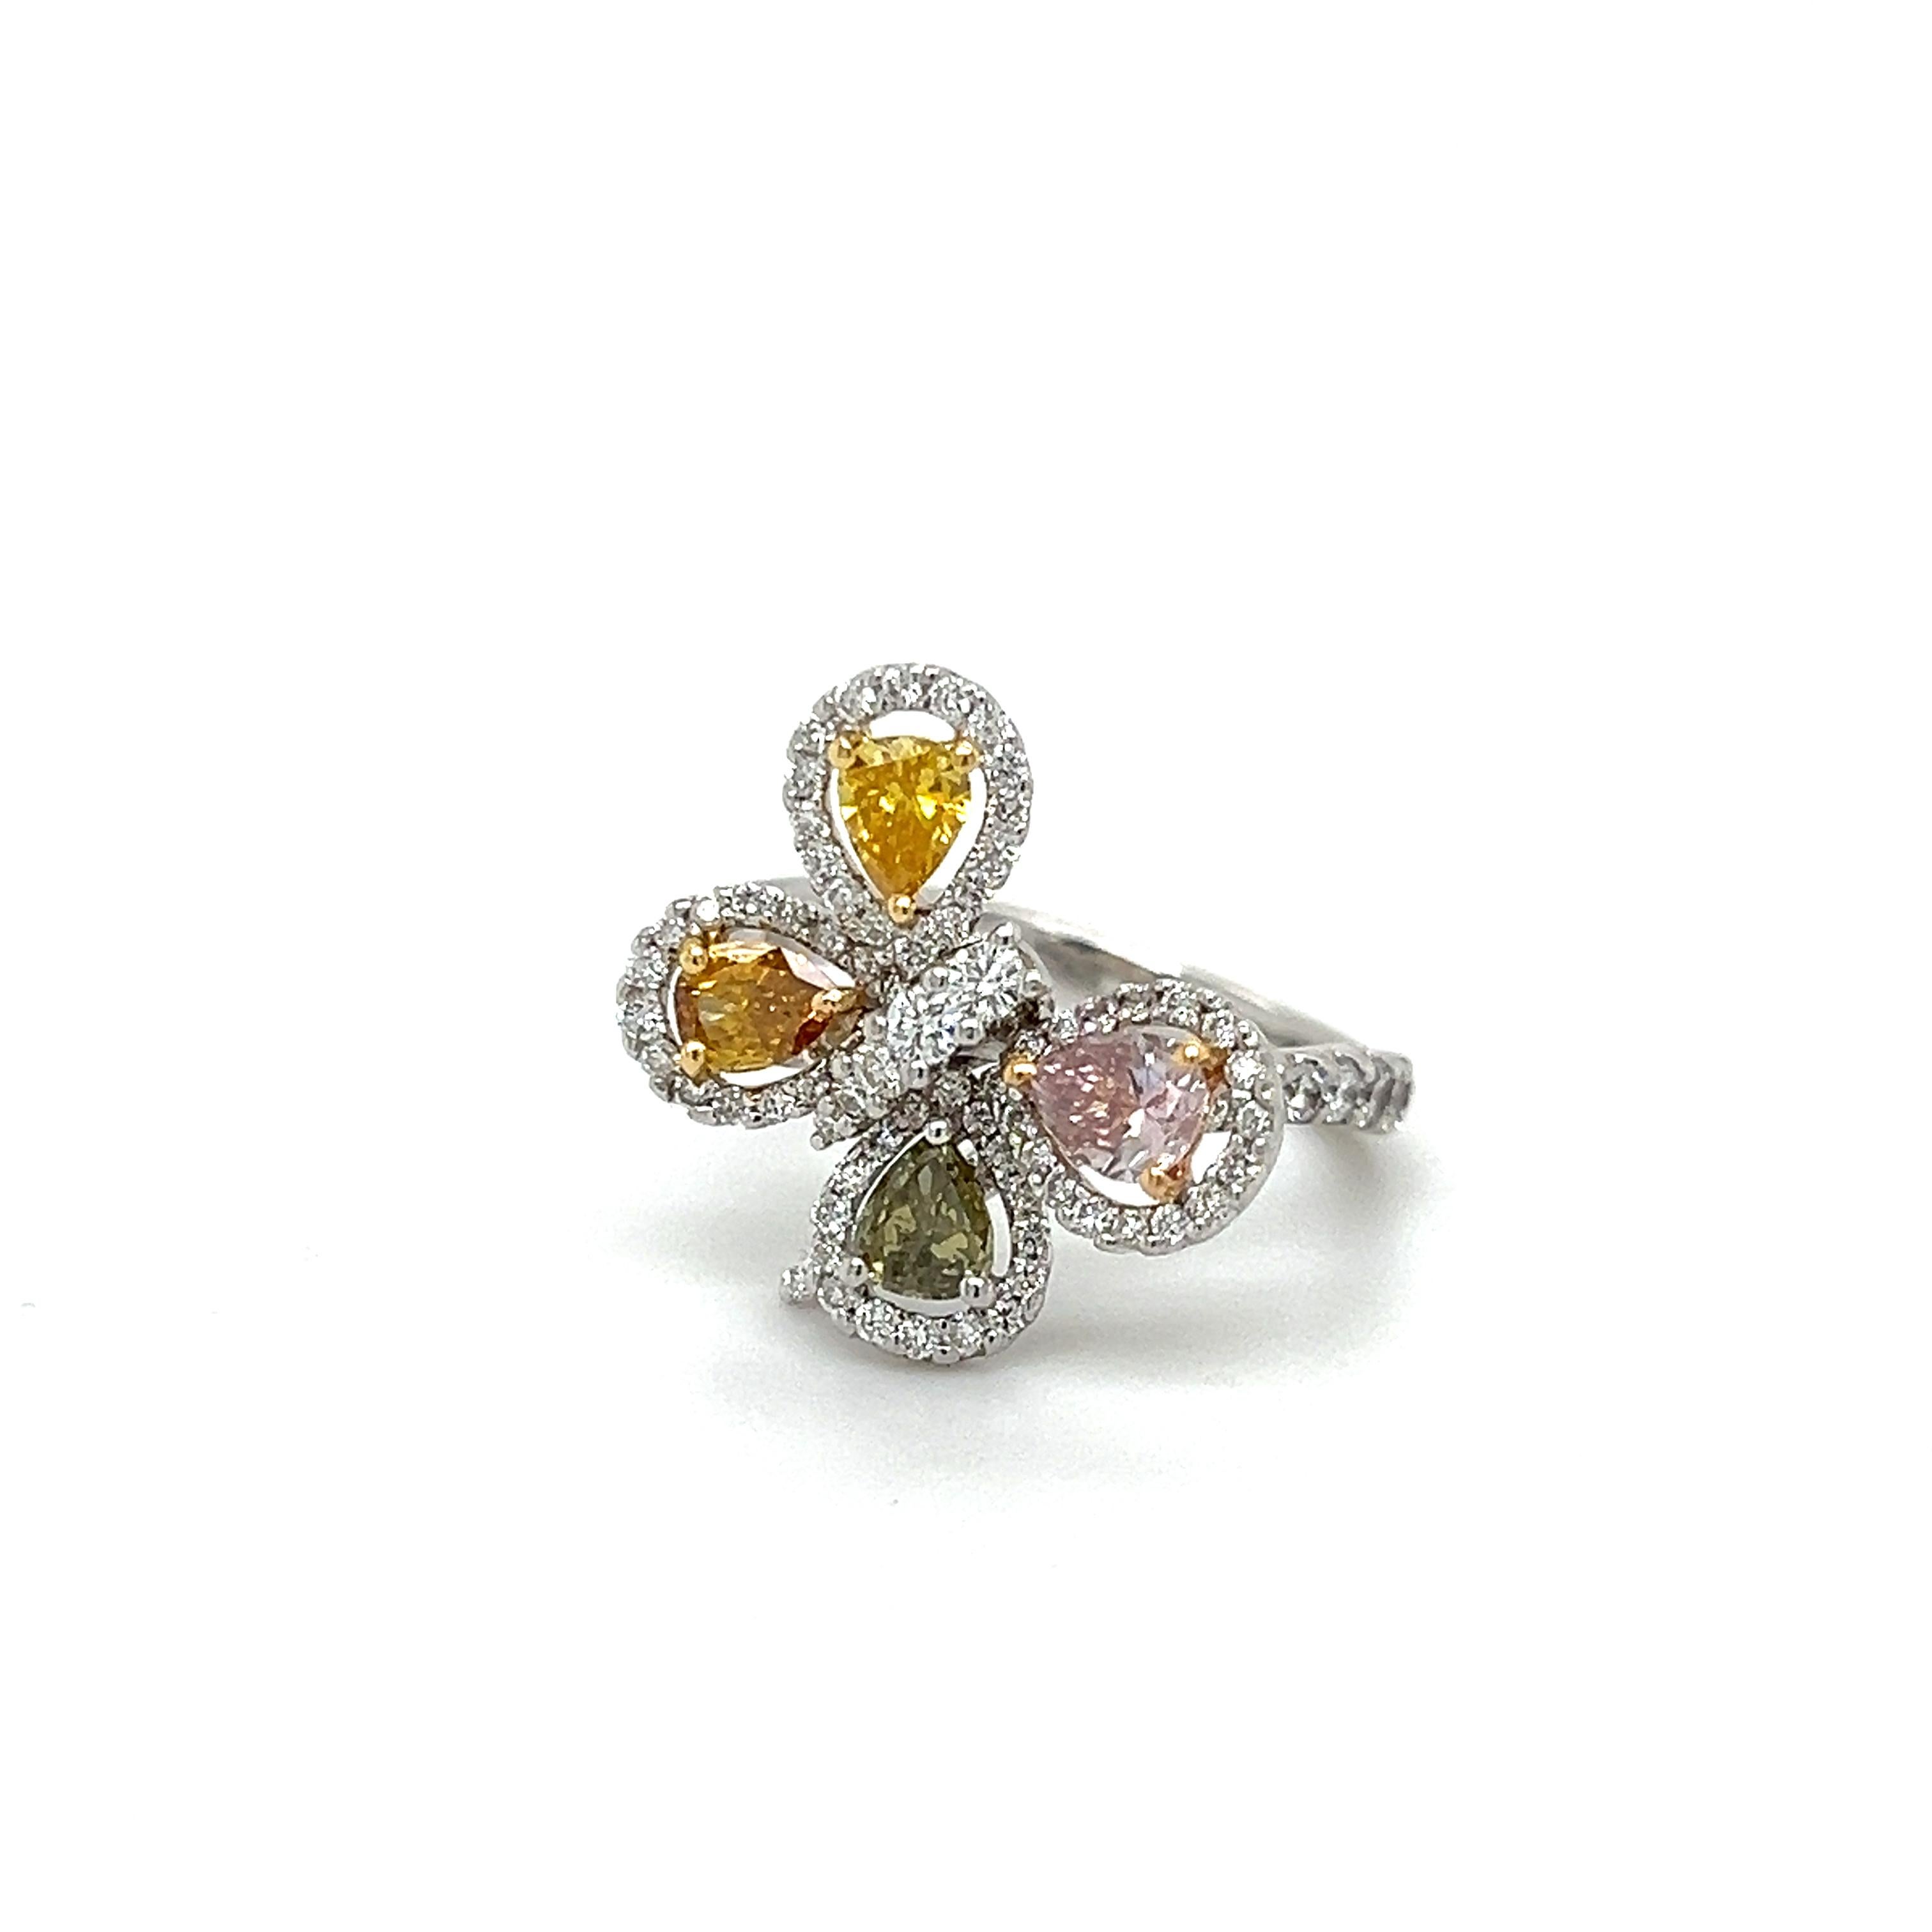 Beautiful design crafted in 18k white gold. The ring highlights natural fancy colored diamonds in a butterfly design. The ring is set with four naturally colored fancy diamonds. Pink, Orange, Yellow & Brown.  
The pear shaped diamonds act as the